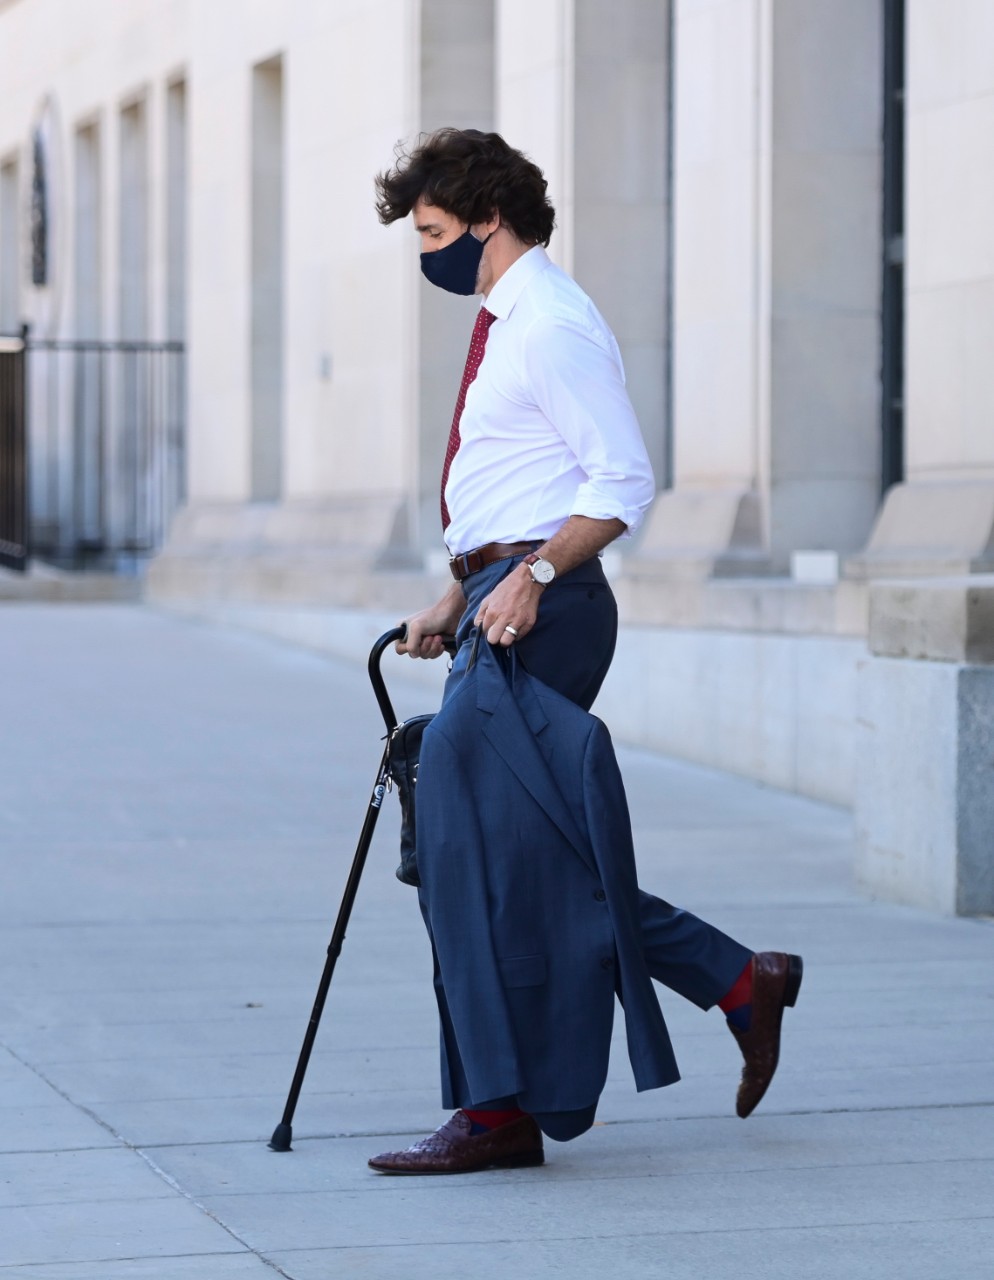 Prime Minister Justin Trudeau walks with a cane as he leaves a news conference in Ottawa on Monday, May 31, 2021. THE CANADIAN PRESS/Sean Kilpatrick